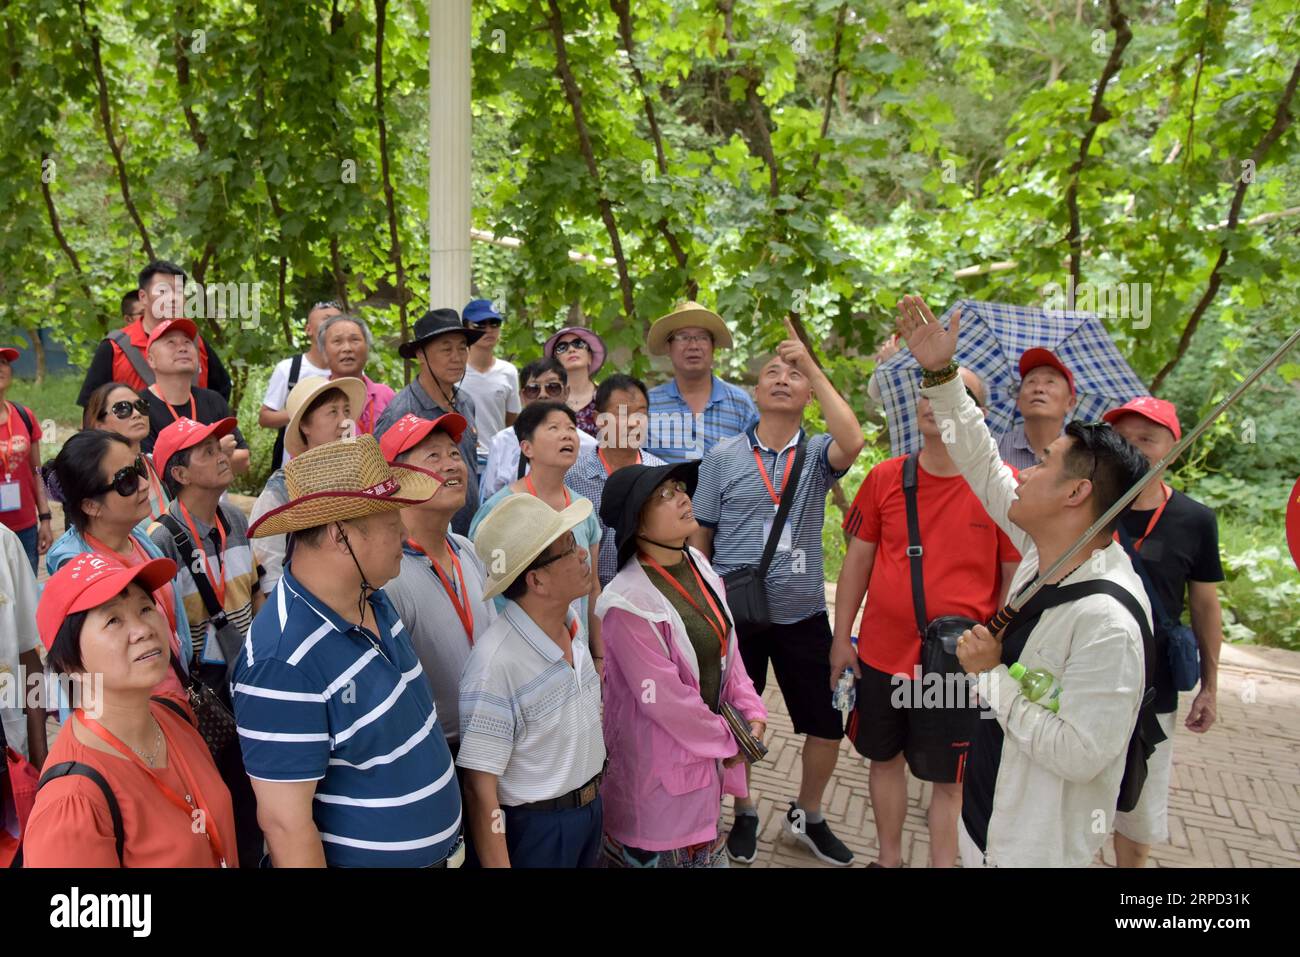 (190720) -- TURPAN, July 20, 2019 -- Tourists visit the Grape Valley scenic area in Turpan, northwest China s Xinjiang Uygur Autonomous Region, July 20, 2019. Turpan has entered its peak tourism season recently. The city saw nearly 8.59 million tourist arrivals in the first half of 2019, up by 91.84 percent over the same period last year. ) CHINA-XINJIANG-TURPAN-TOURISM (CN) DingxLei PUBLICATIONxNOTxINxCHN Stock Photo